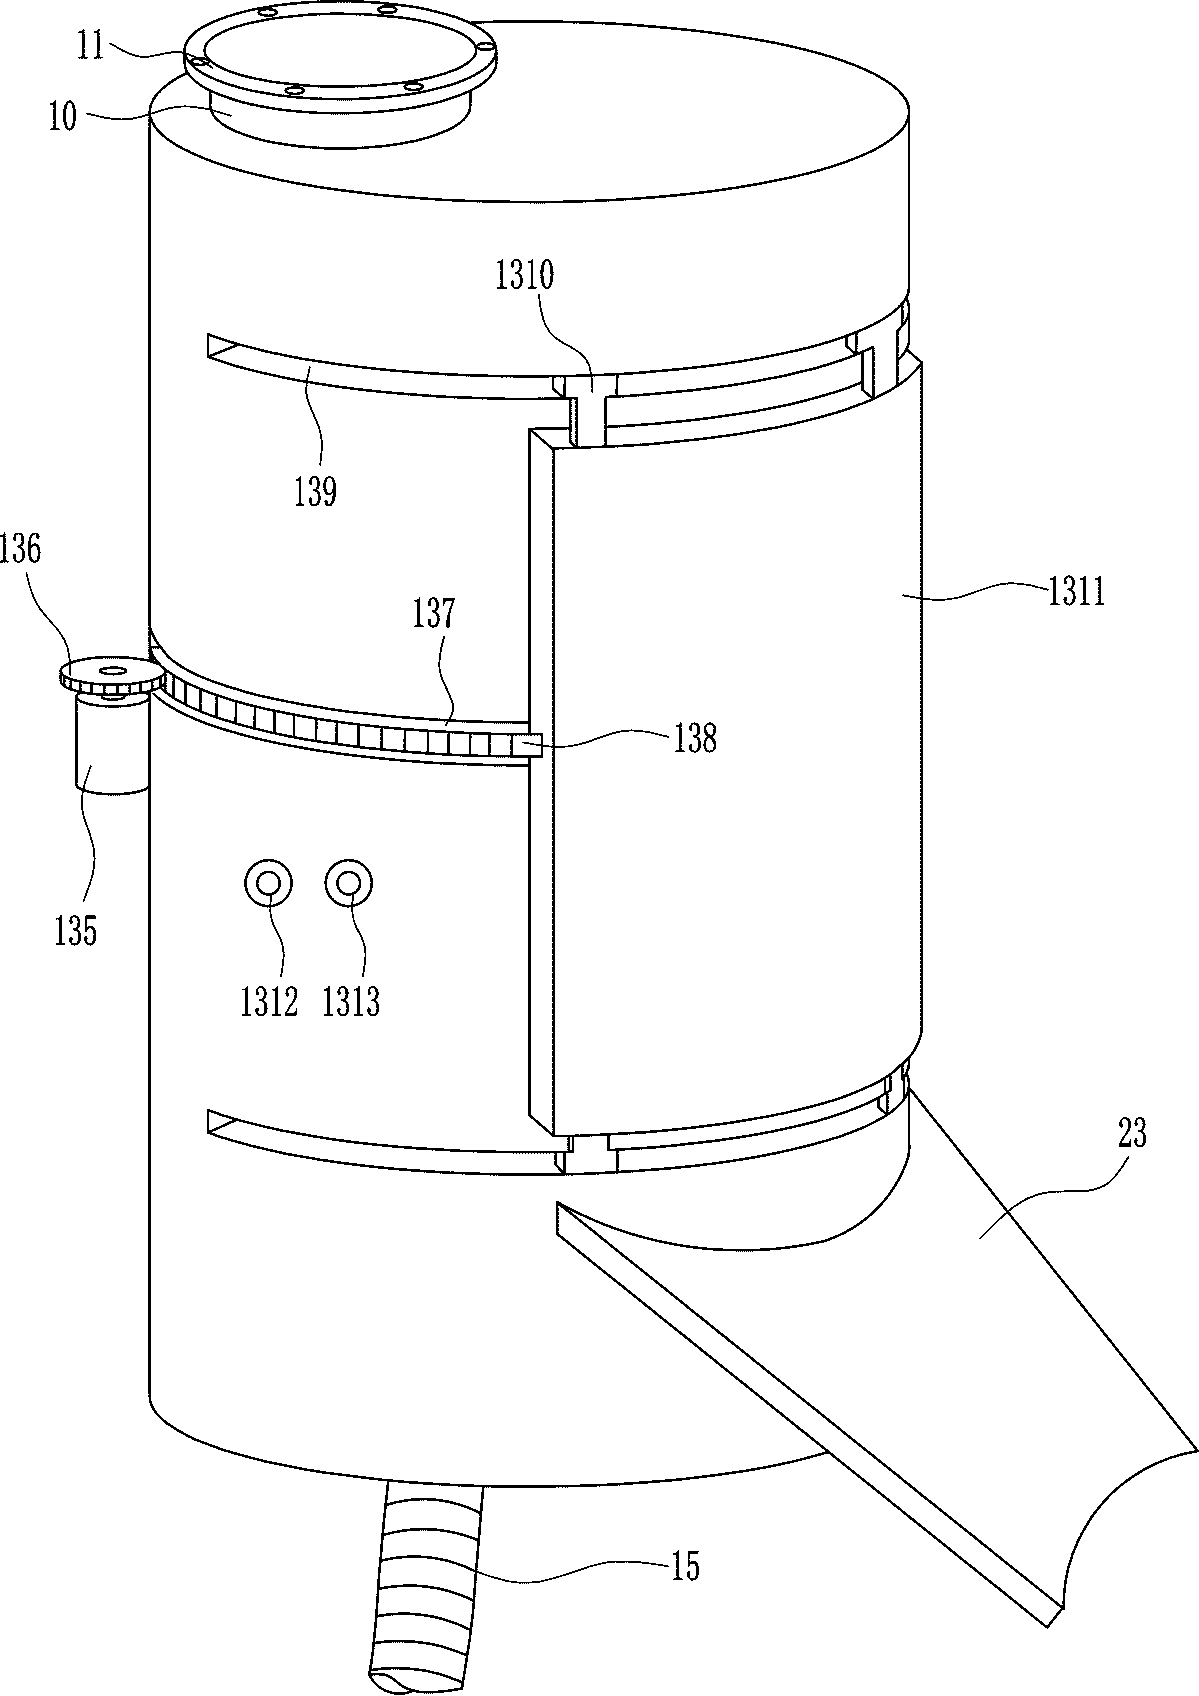 A roof drainage impurity and water separation device